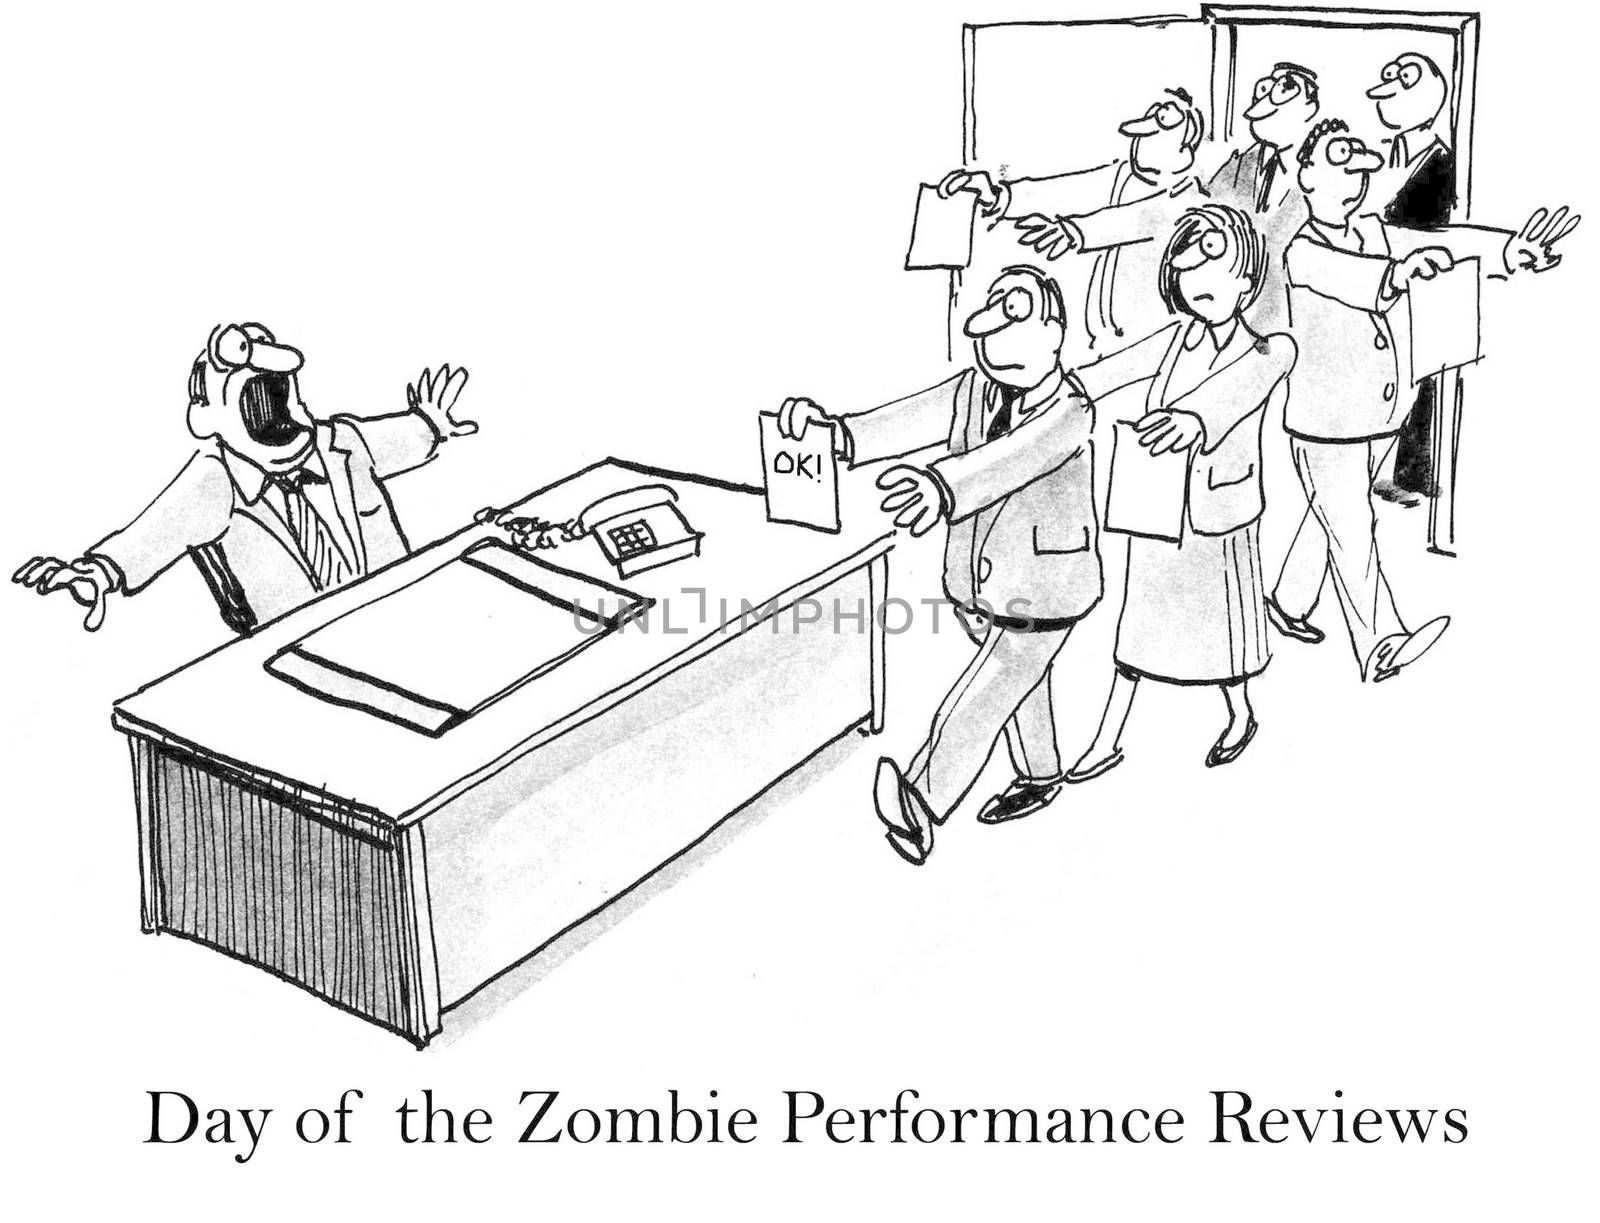 Day of the Zombie Performance Reviews.